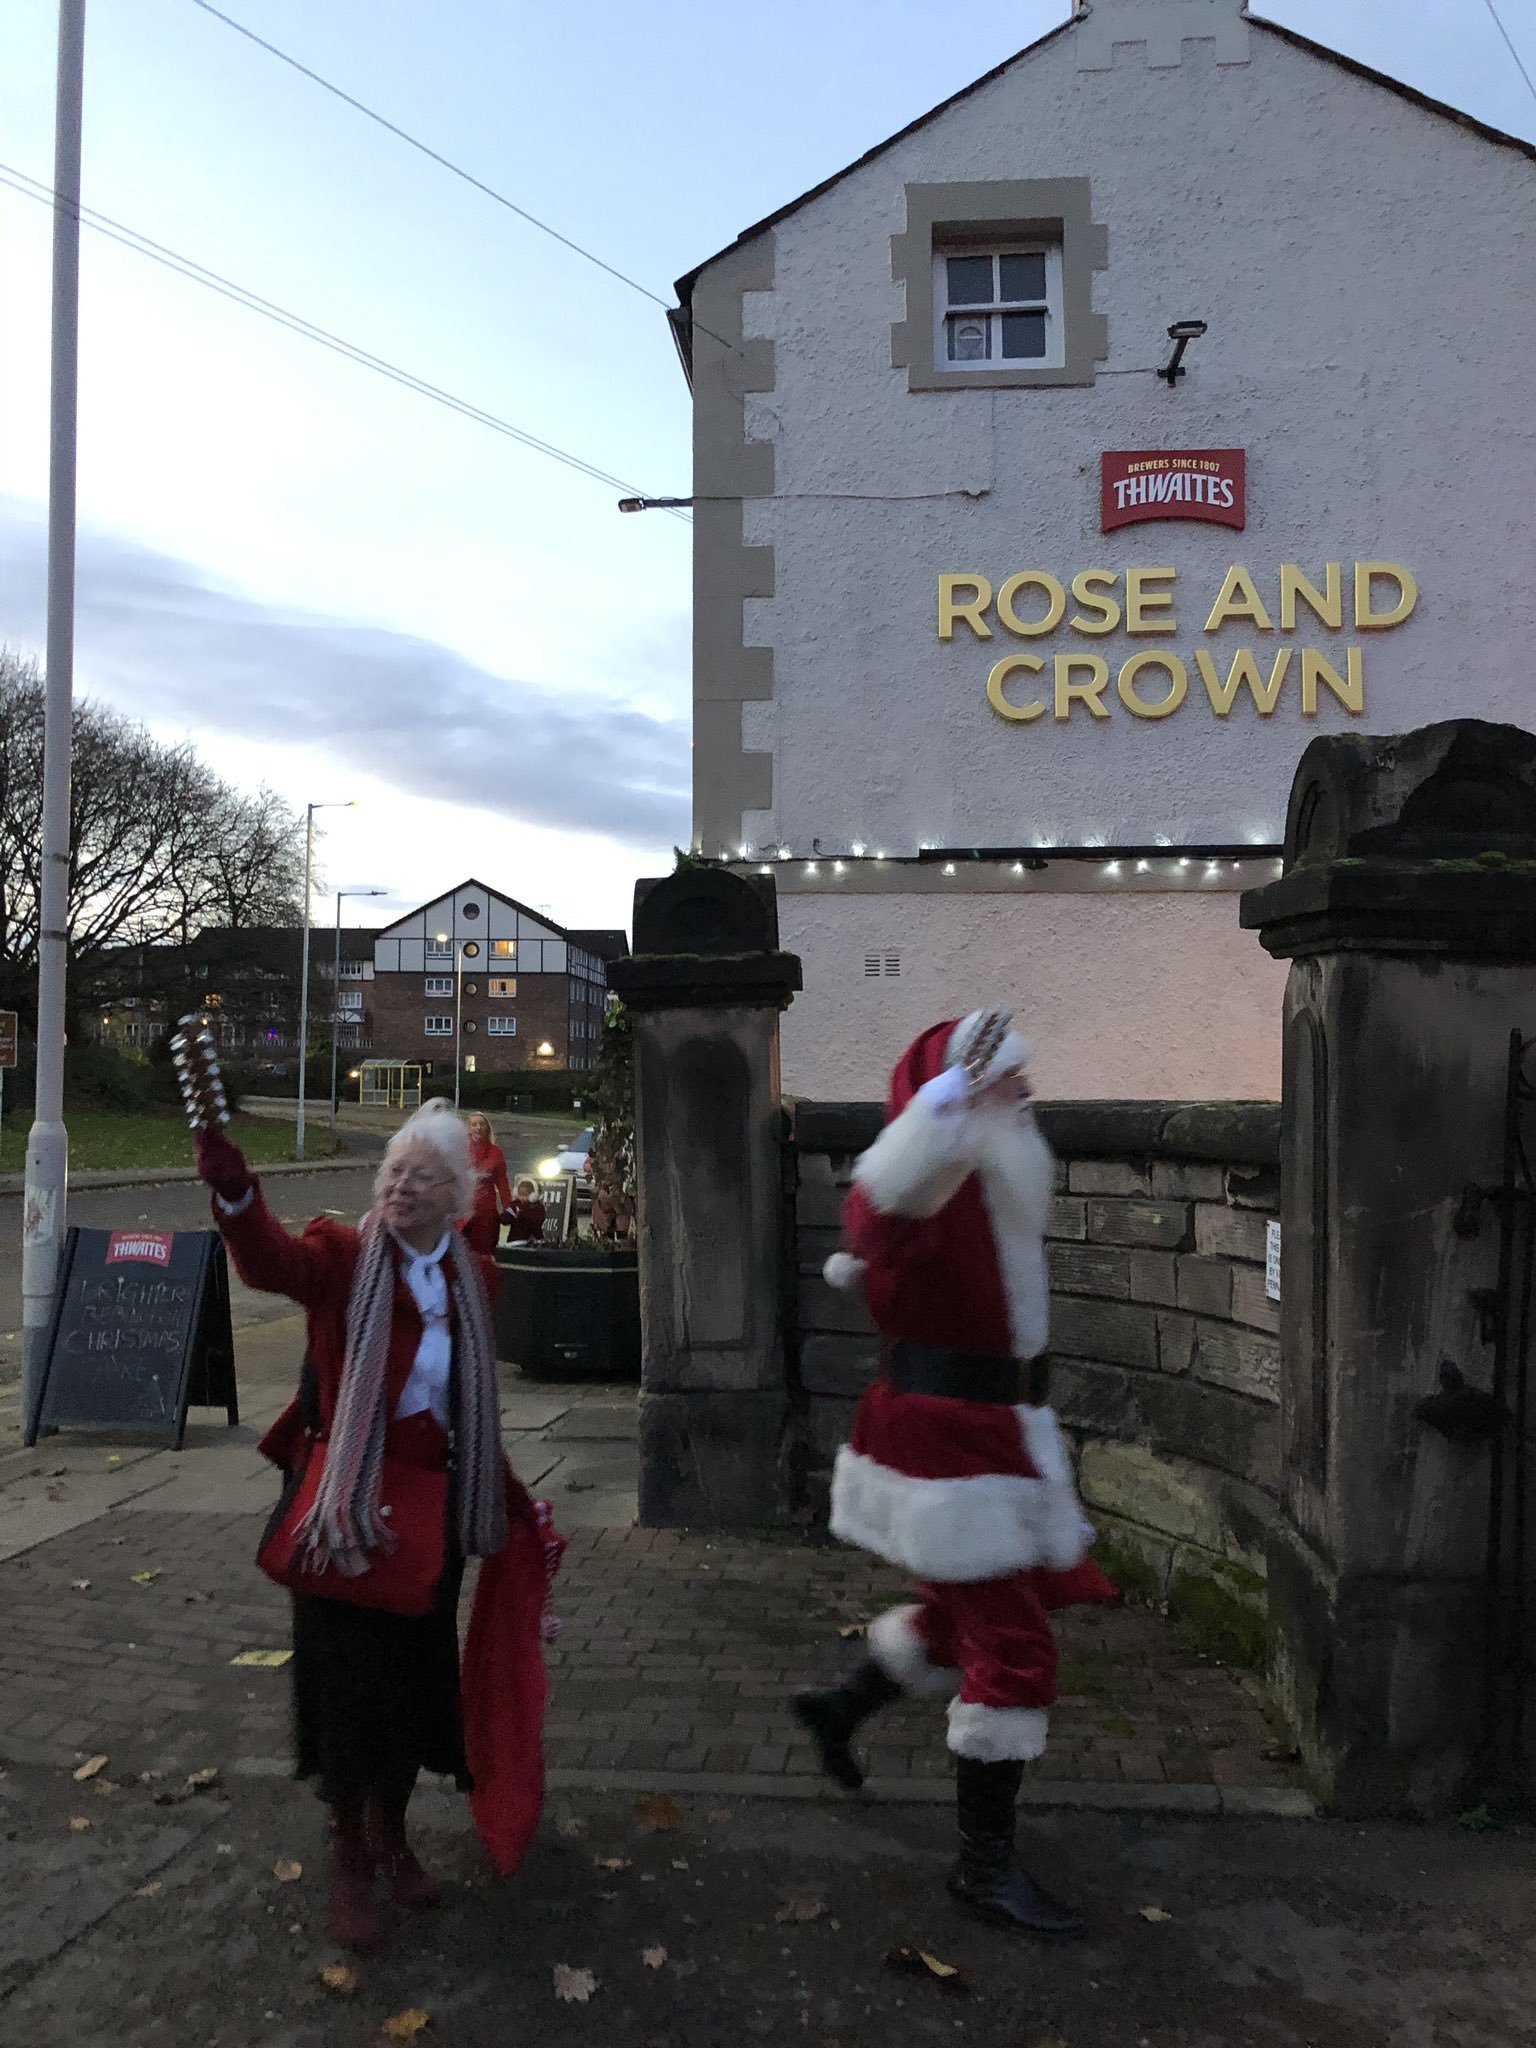 The Rose and Crown pub will hold a raffle at the end of the fun-packed day